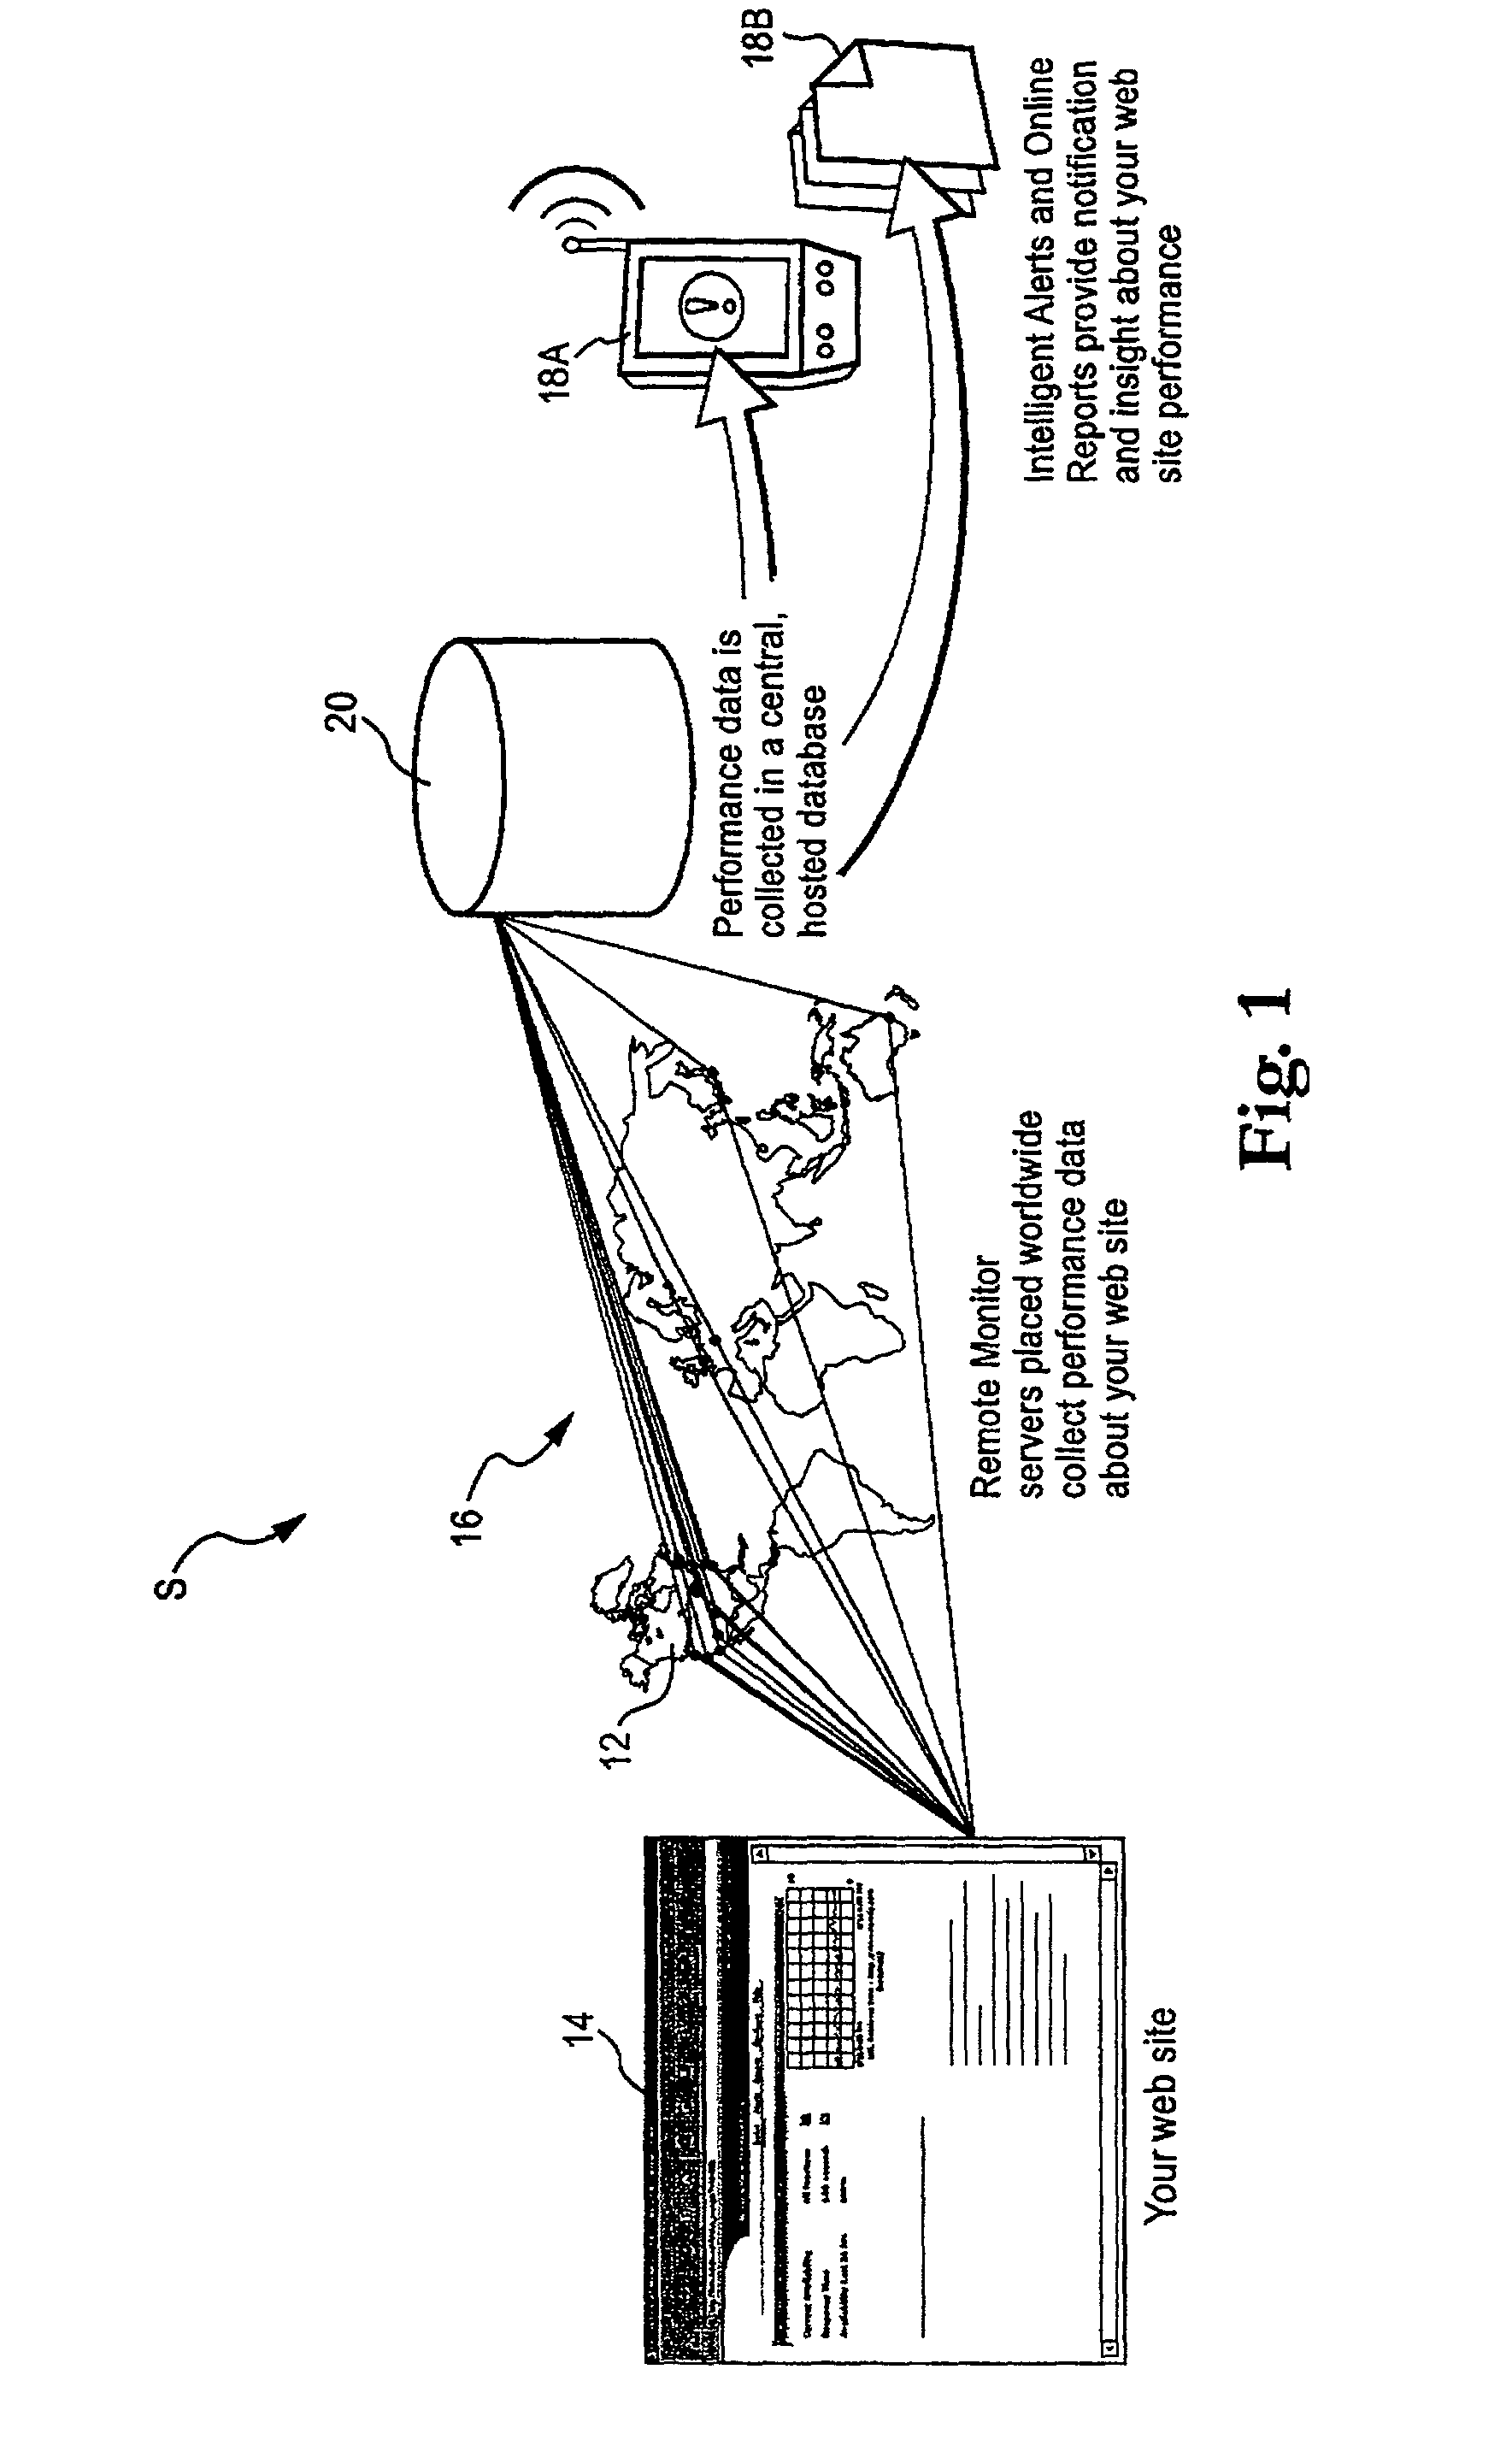 Methods of determining communications protocol latency